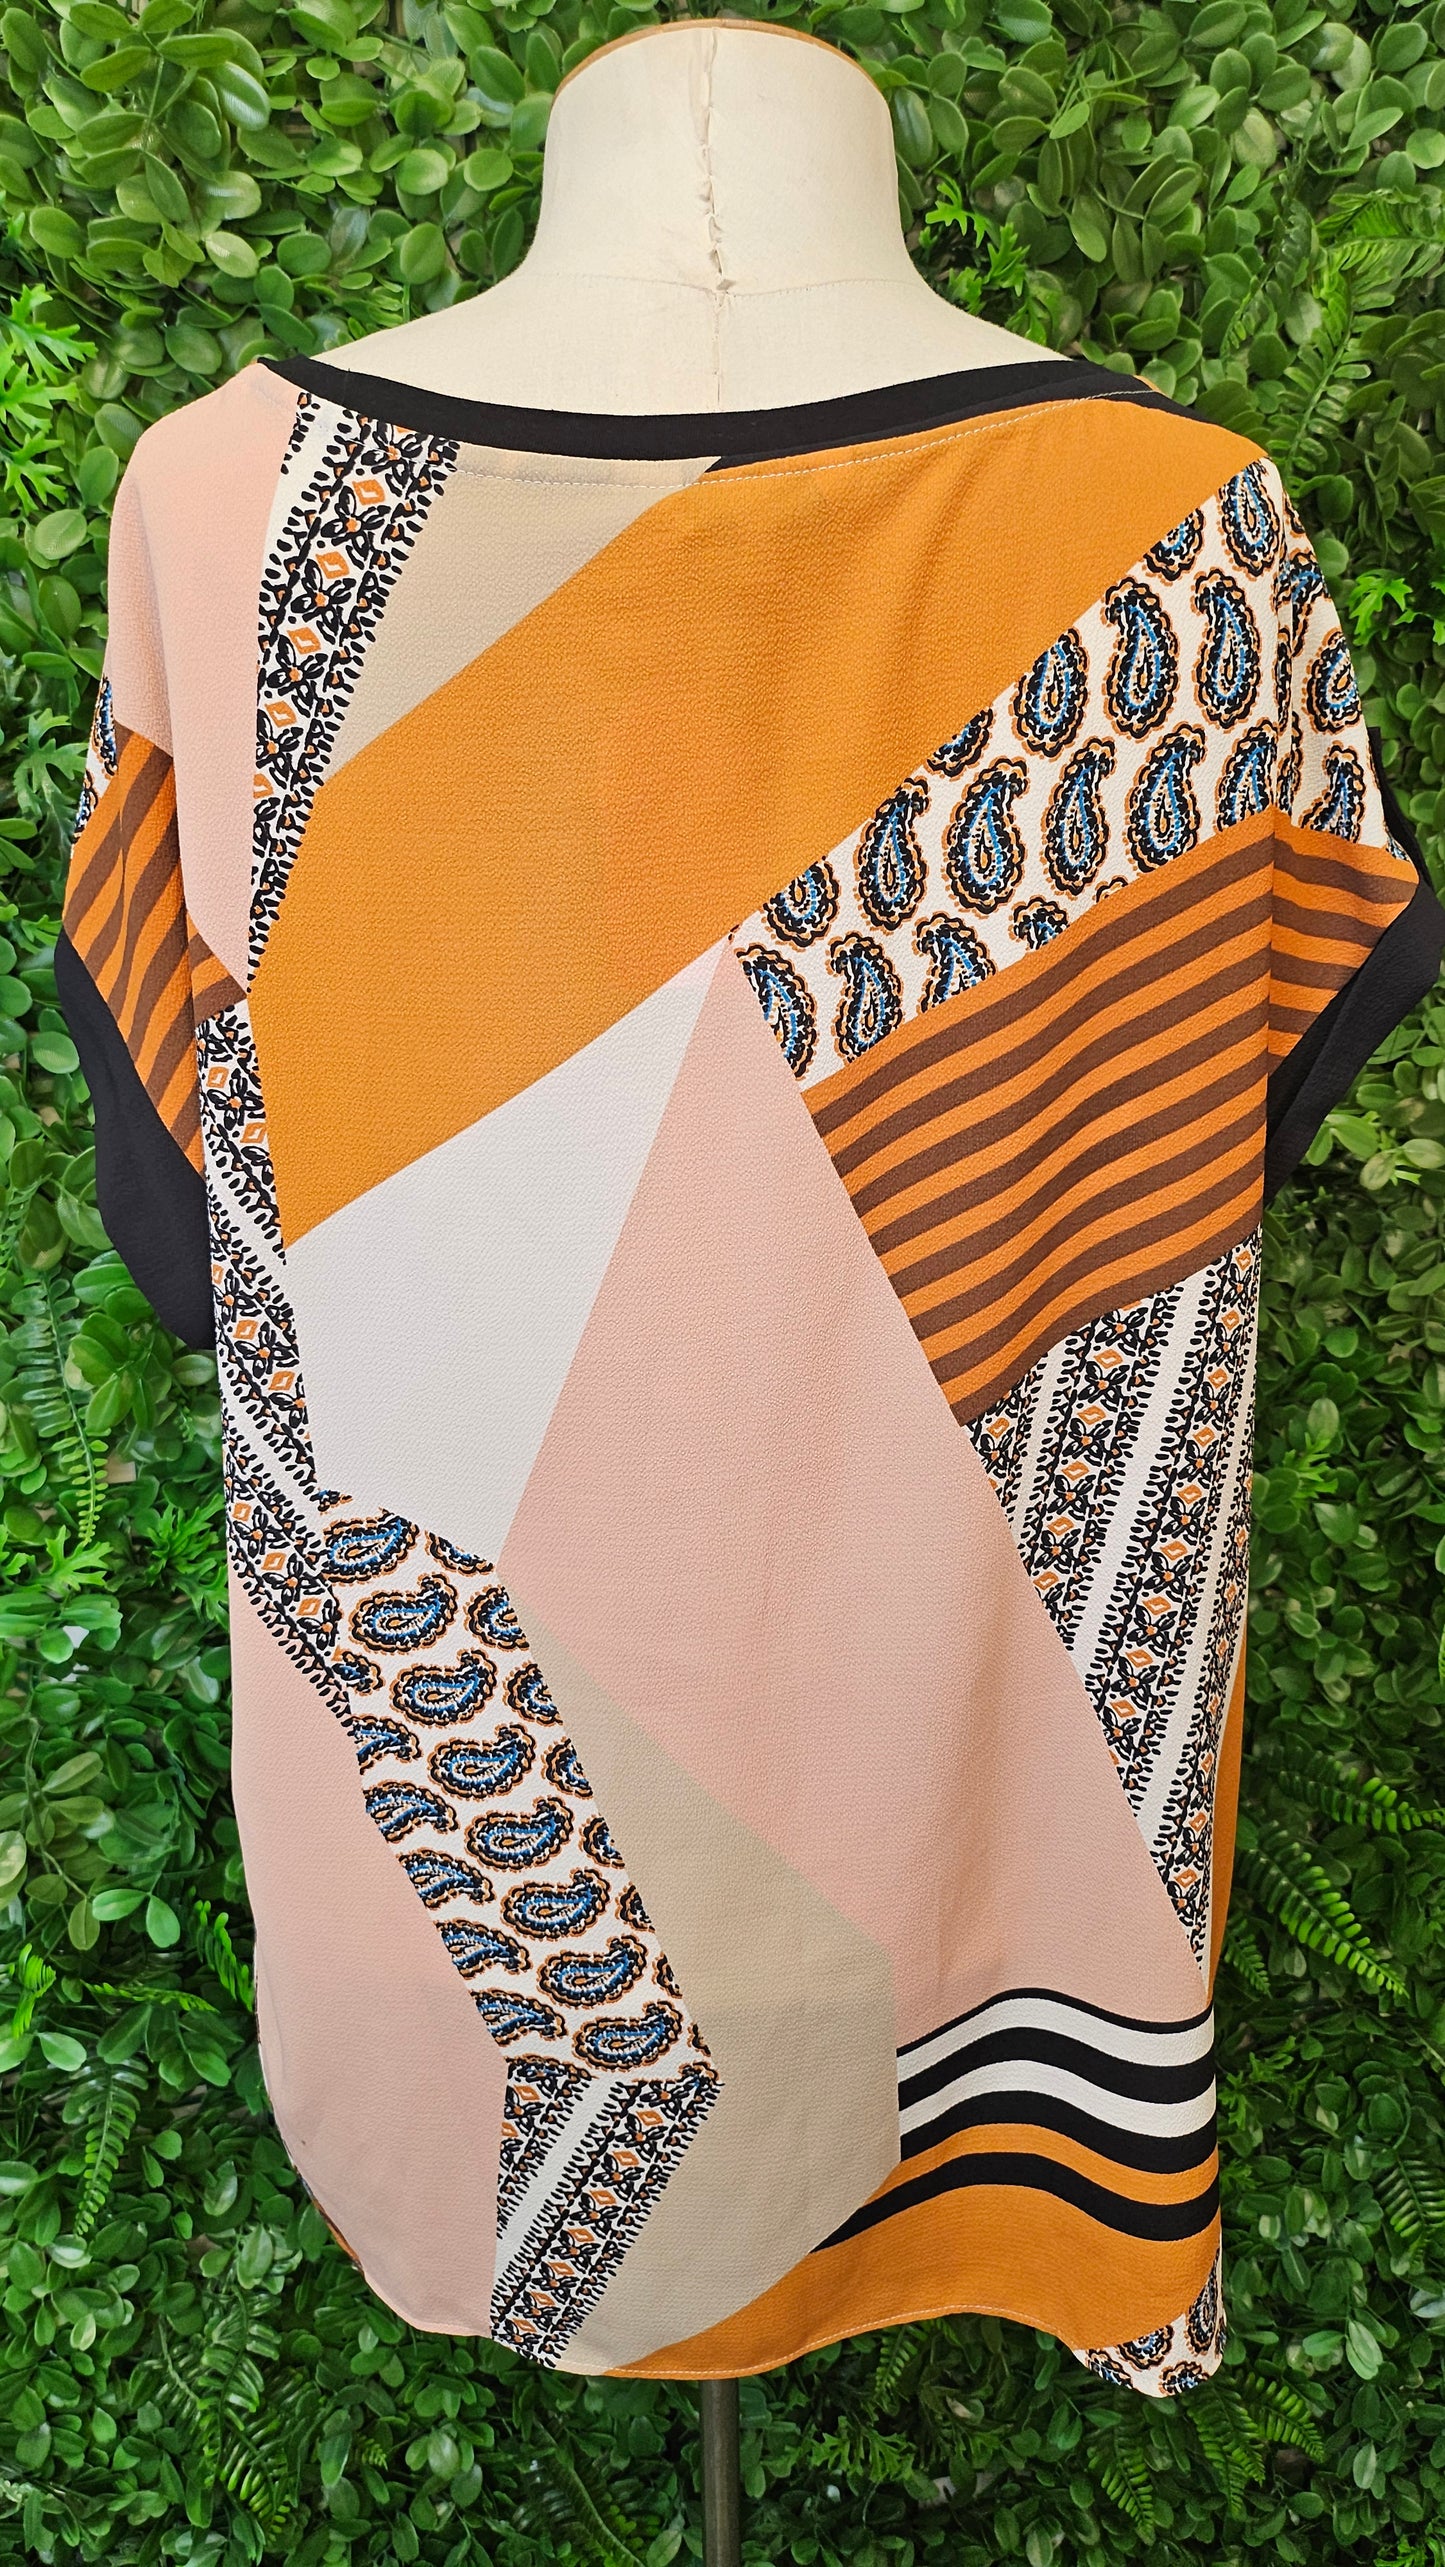 Next  Patterned Top (20)